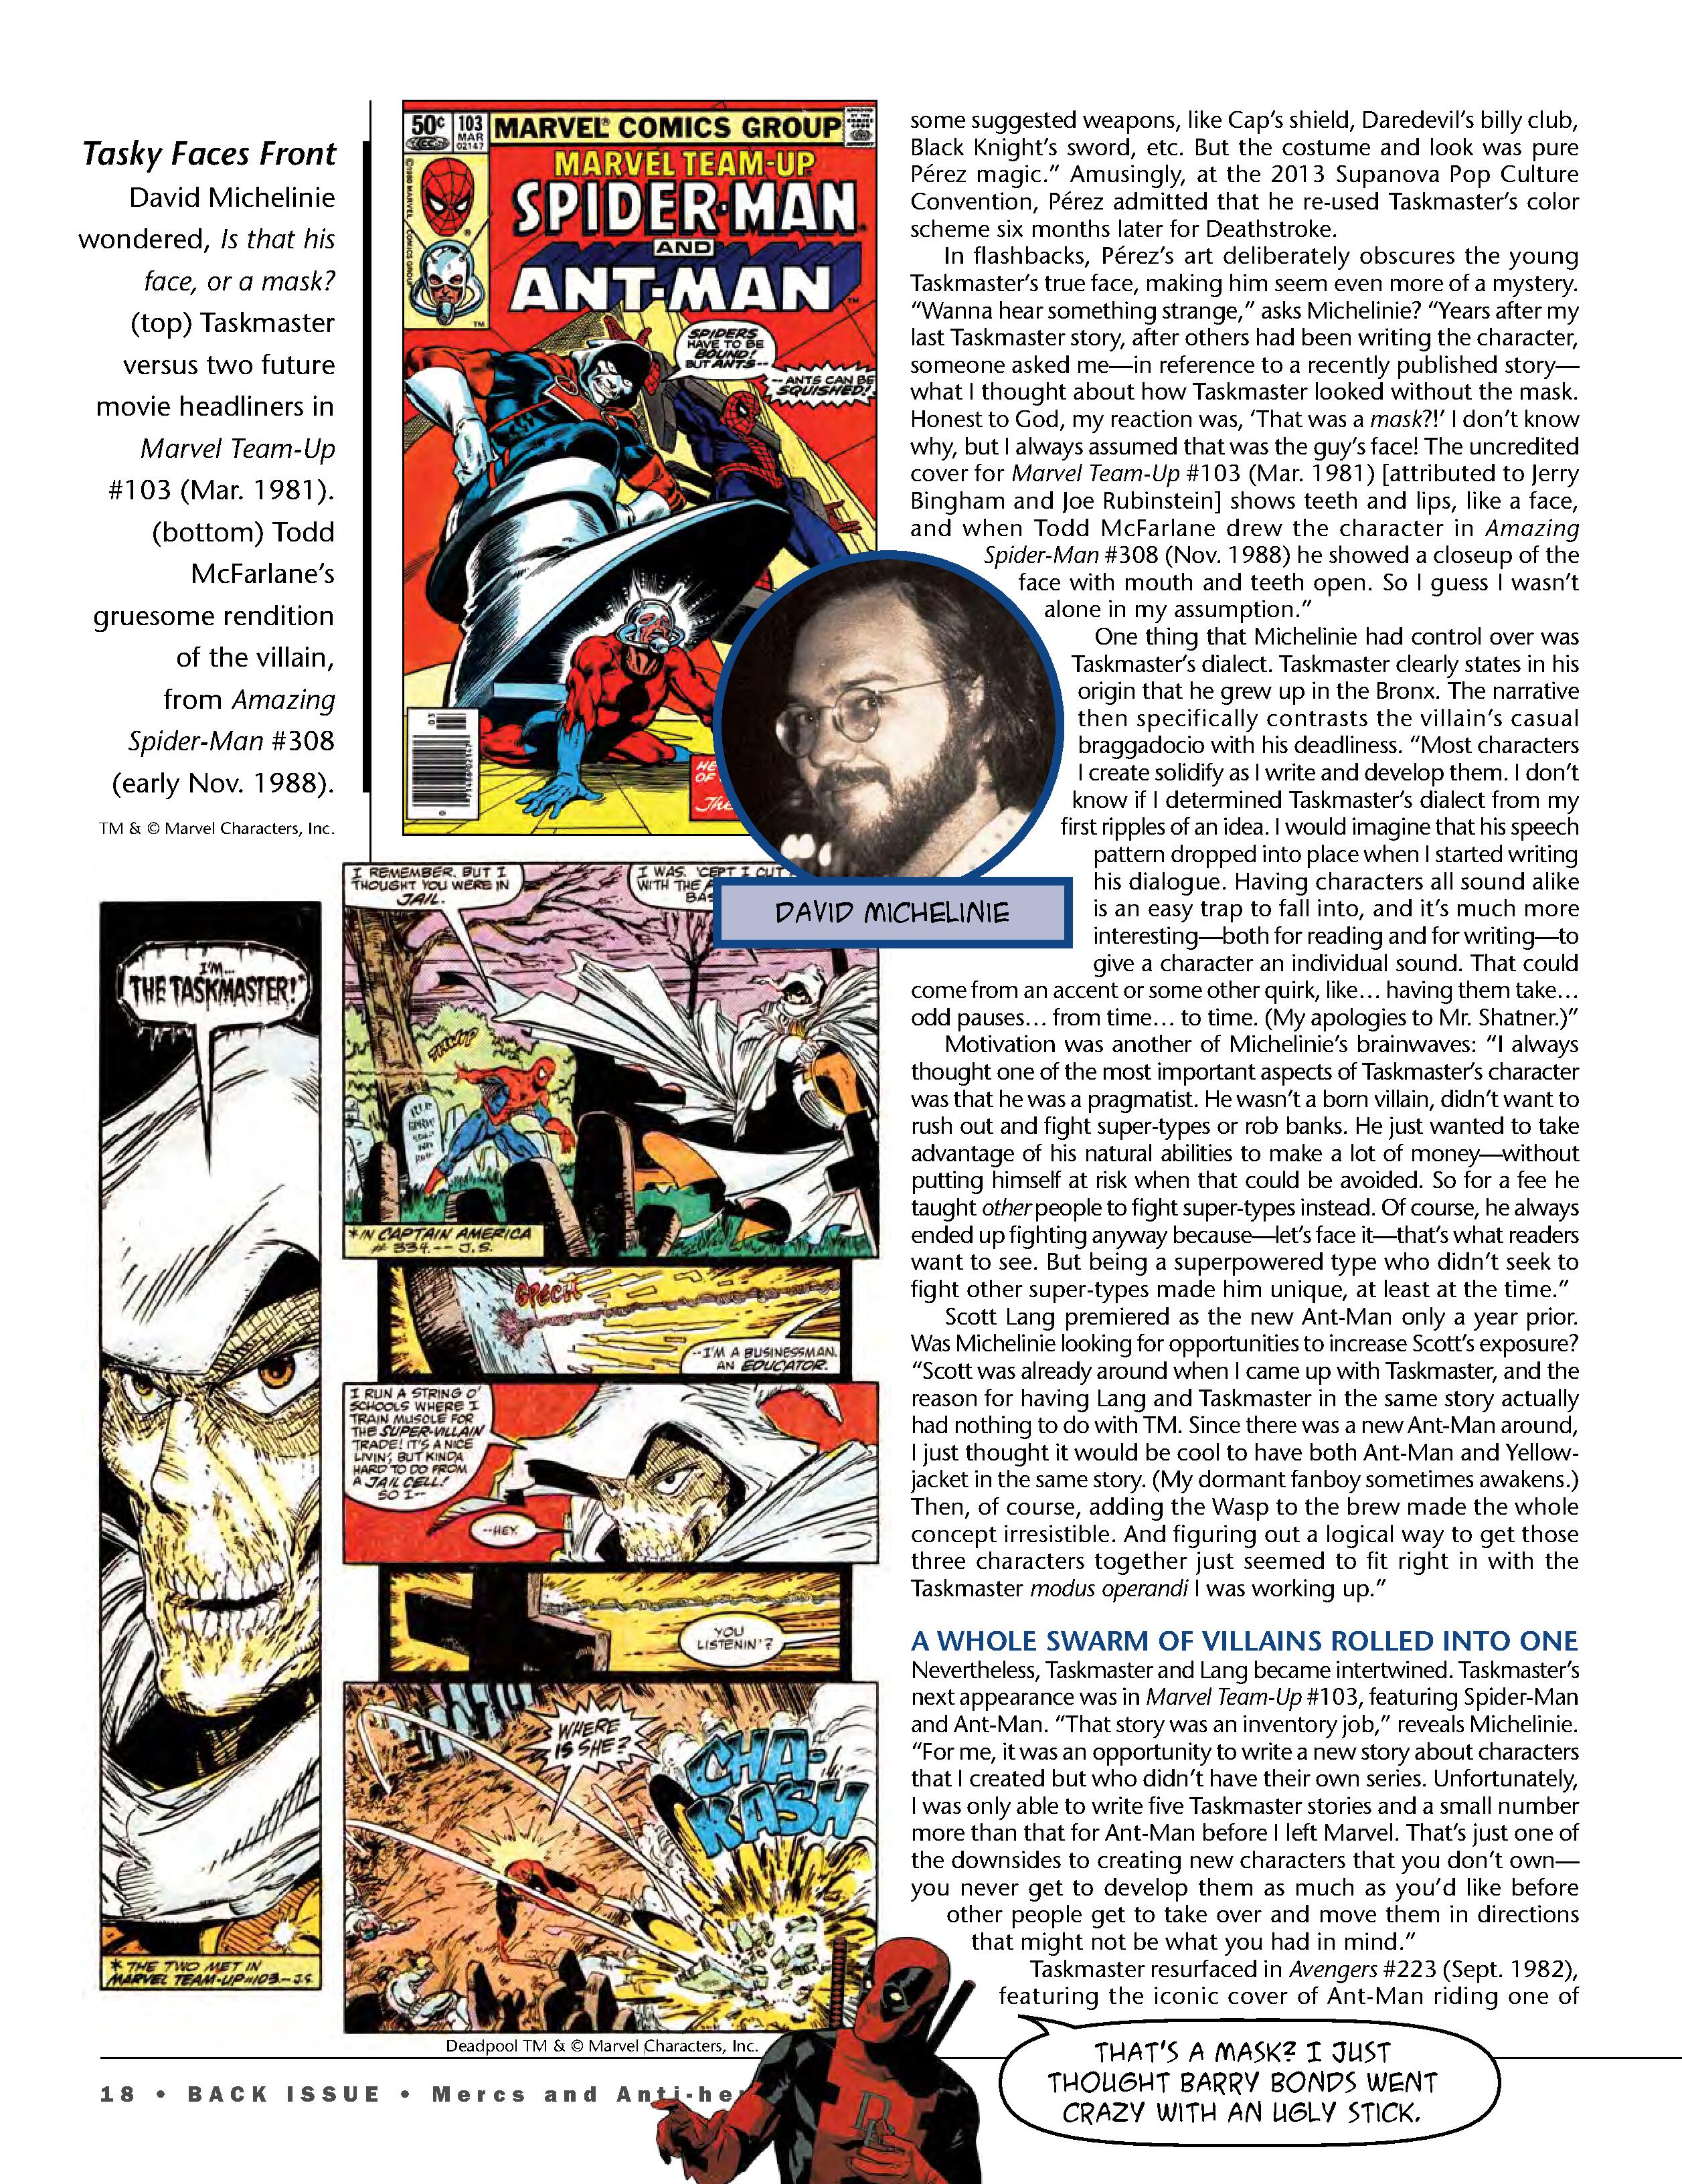 Read online Back Issue comic -  Issue #102 - 20